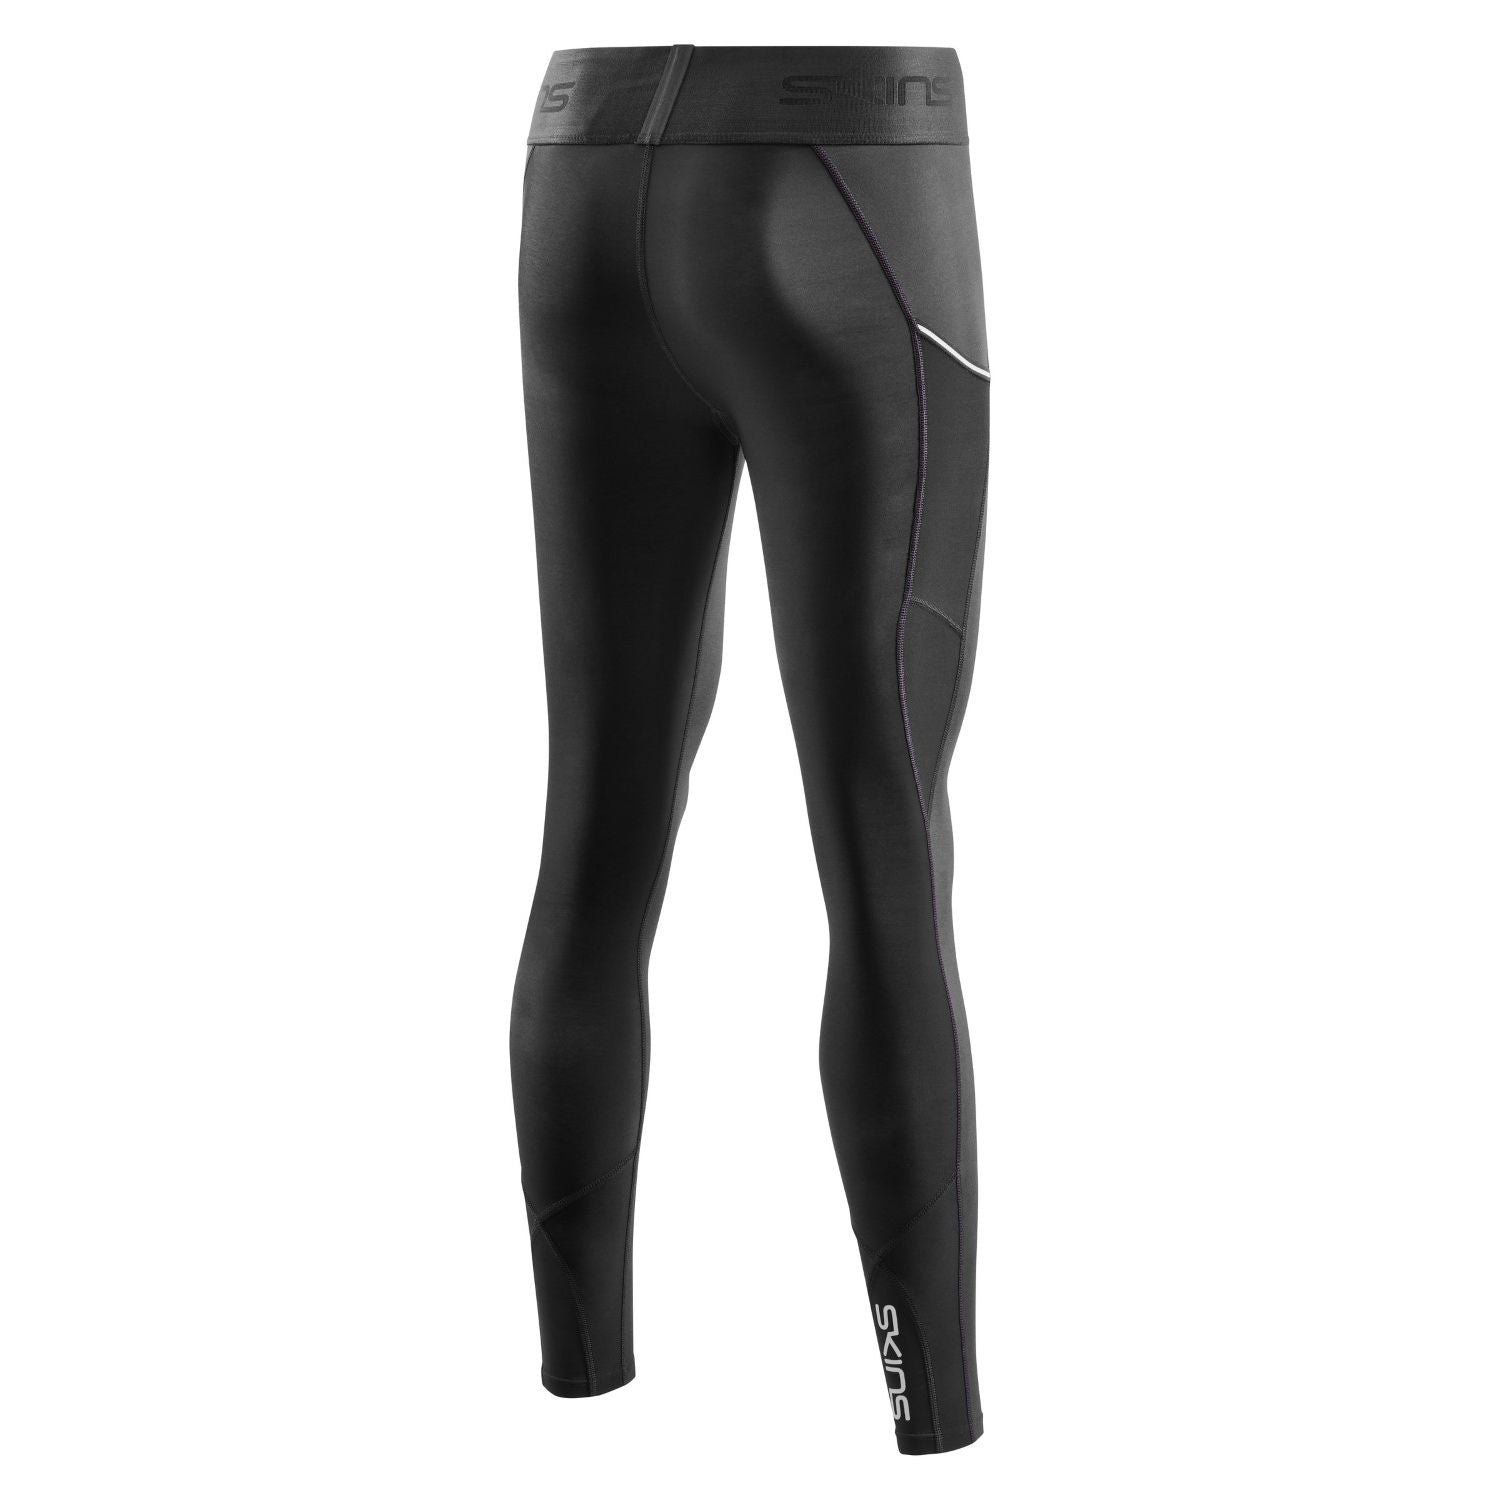 Women's SKINS Series 3 Travel and Recovery Compression Tights